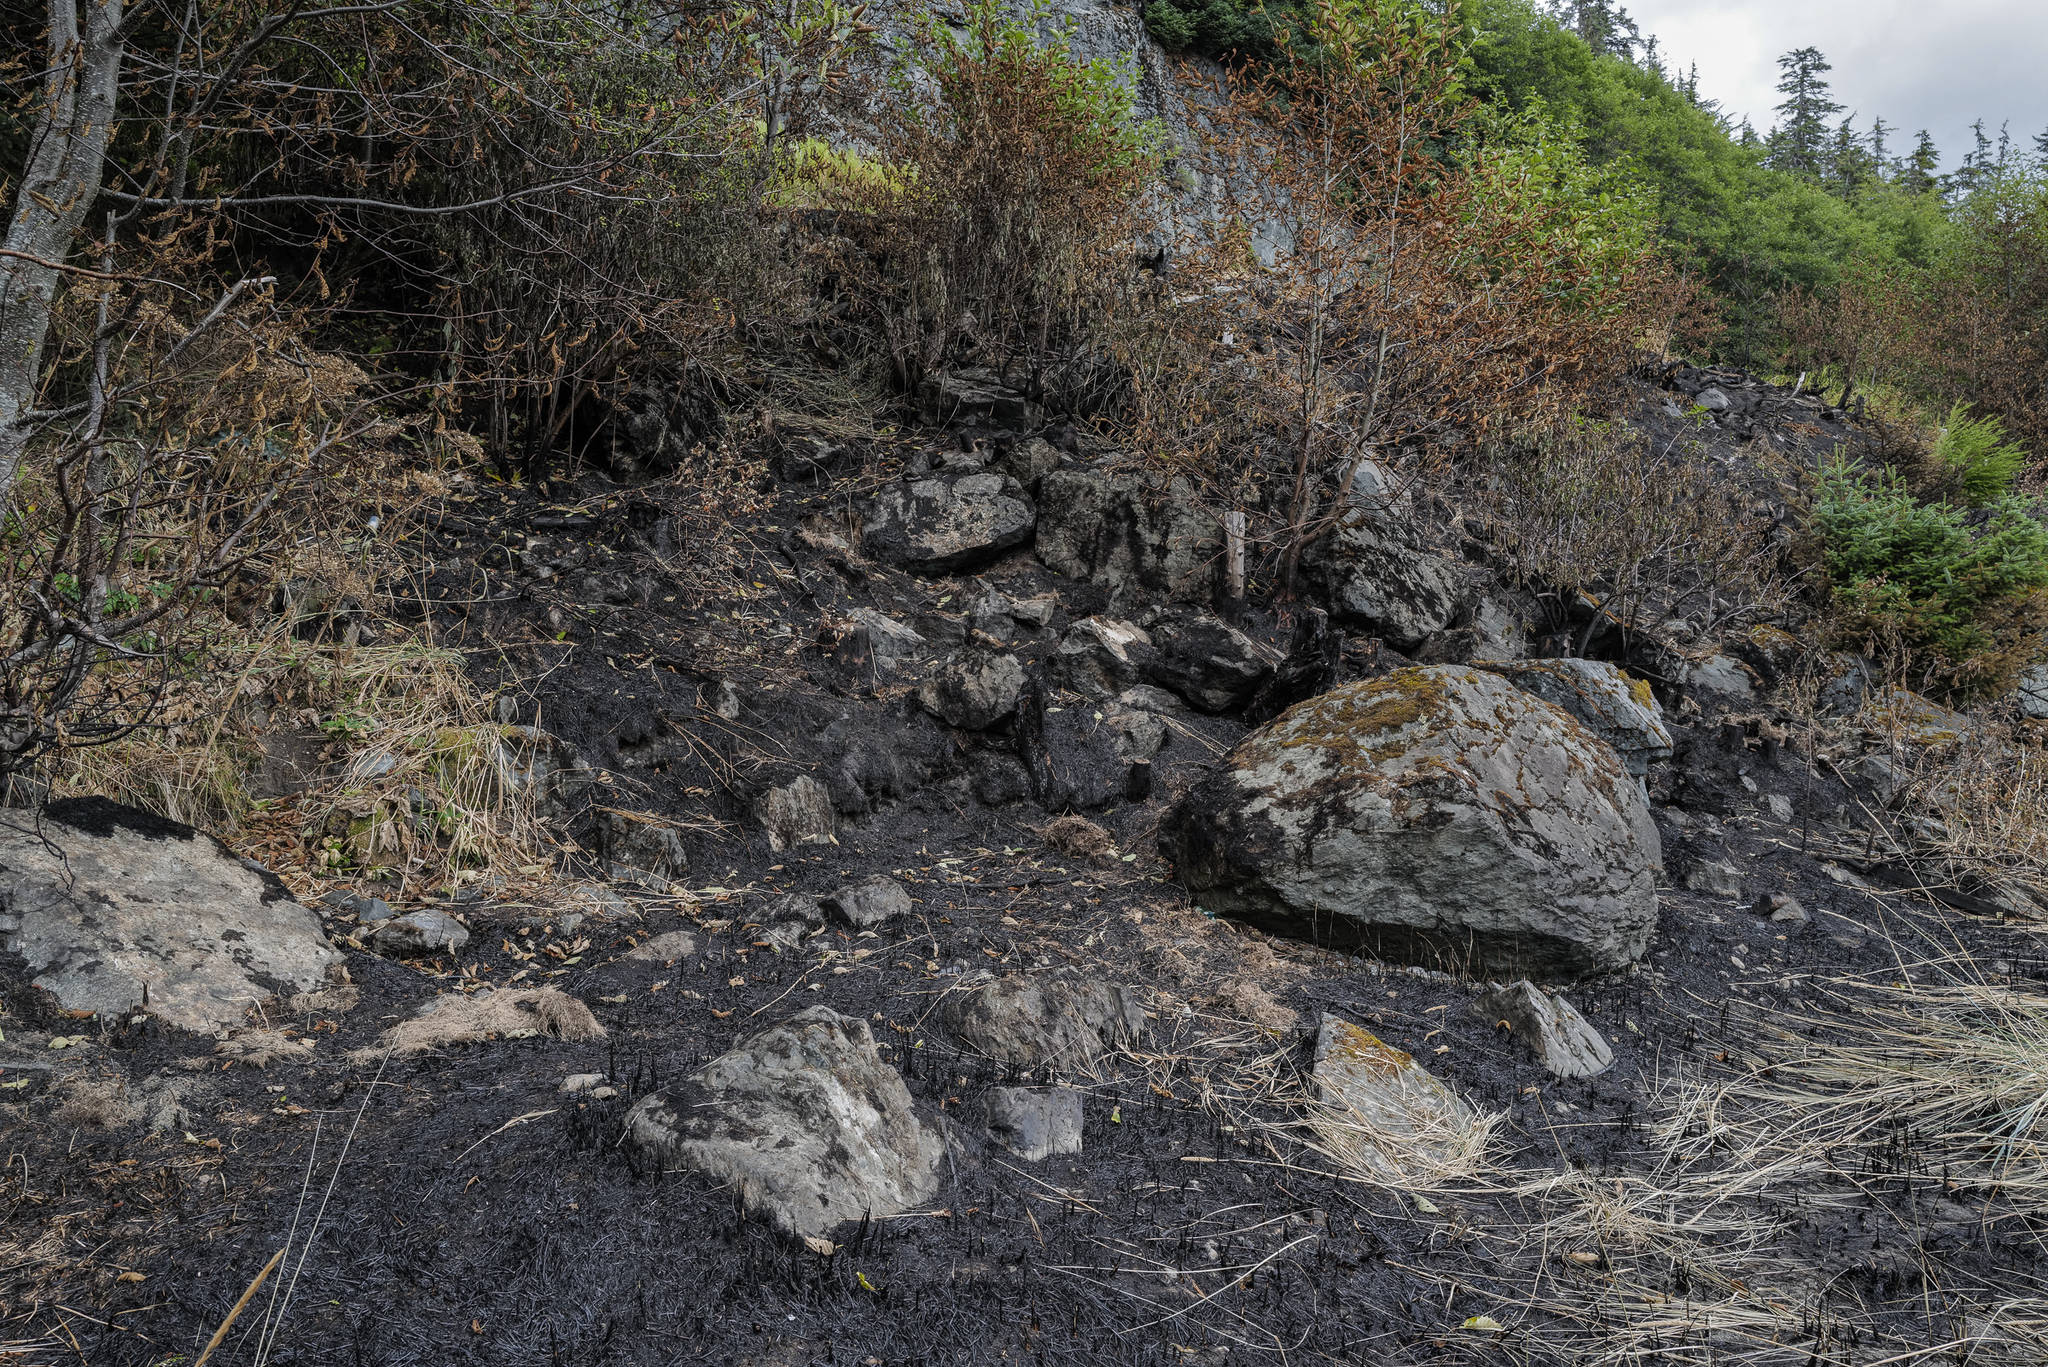 Fire damage at Sunshine Cove covers about one-half acre on Monday, Aug. 19, 2019. Capital City Fire/Rescue reports they responded to a wildfire at Sunshine Cove Friday night. Fireworks found on the scene are the suspected cause of the fire according to Capital City Fire/Rescue Assistant Chief Chad Cameron. (Michael Penn Juneau Empire)